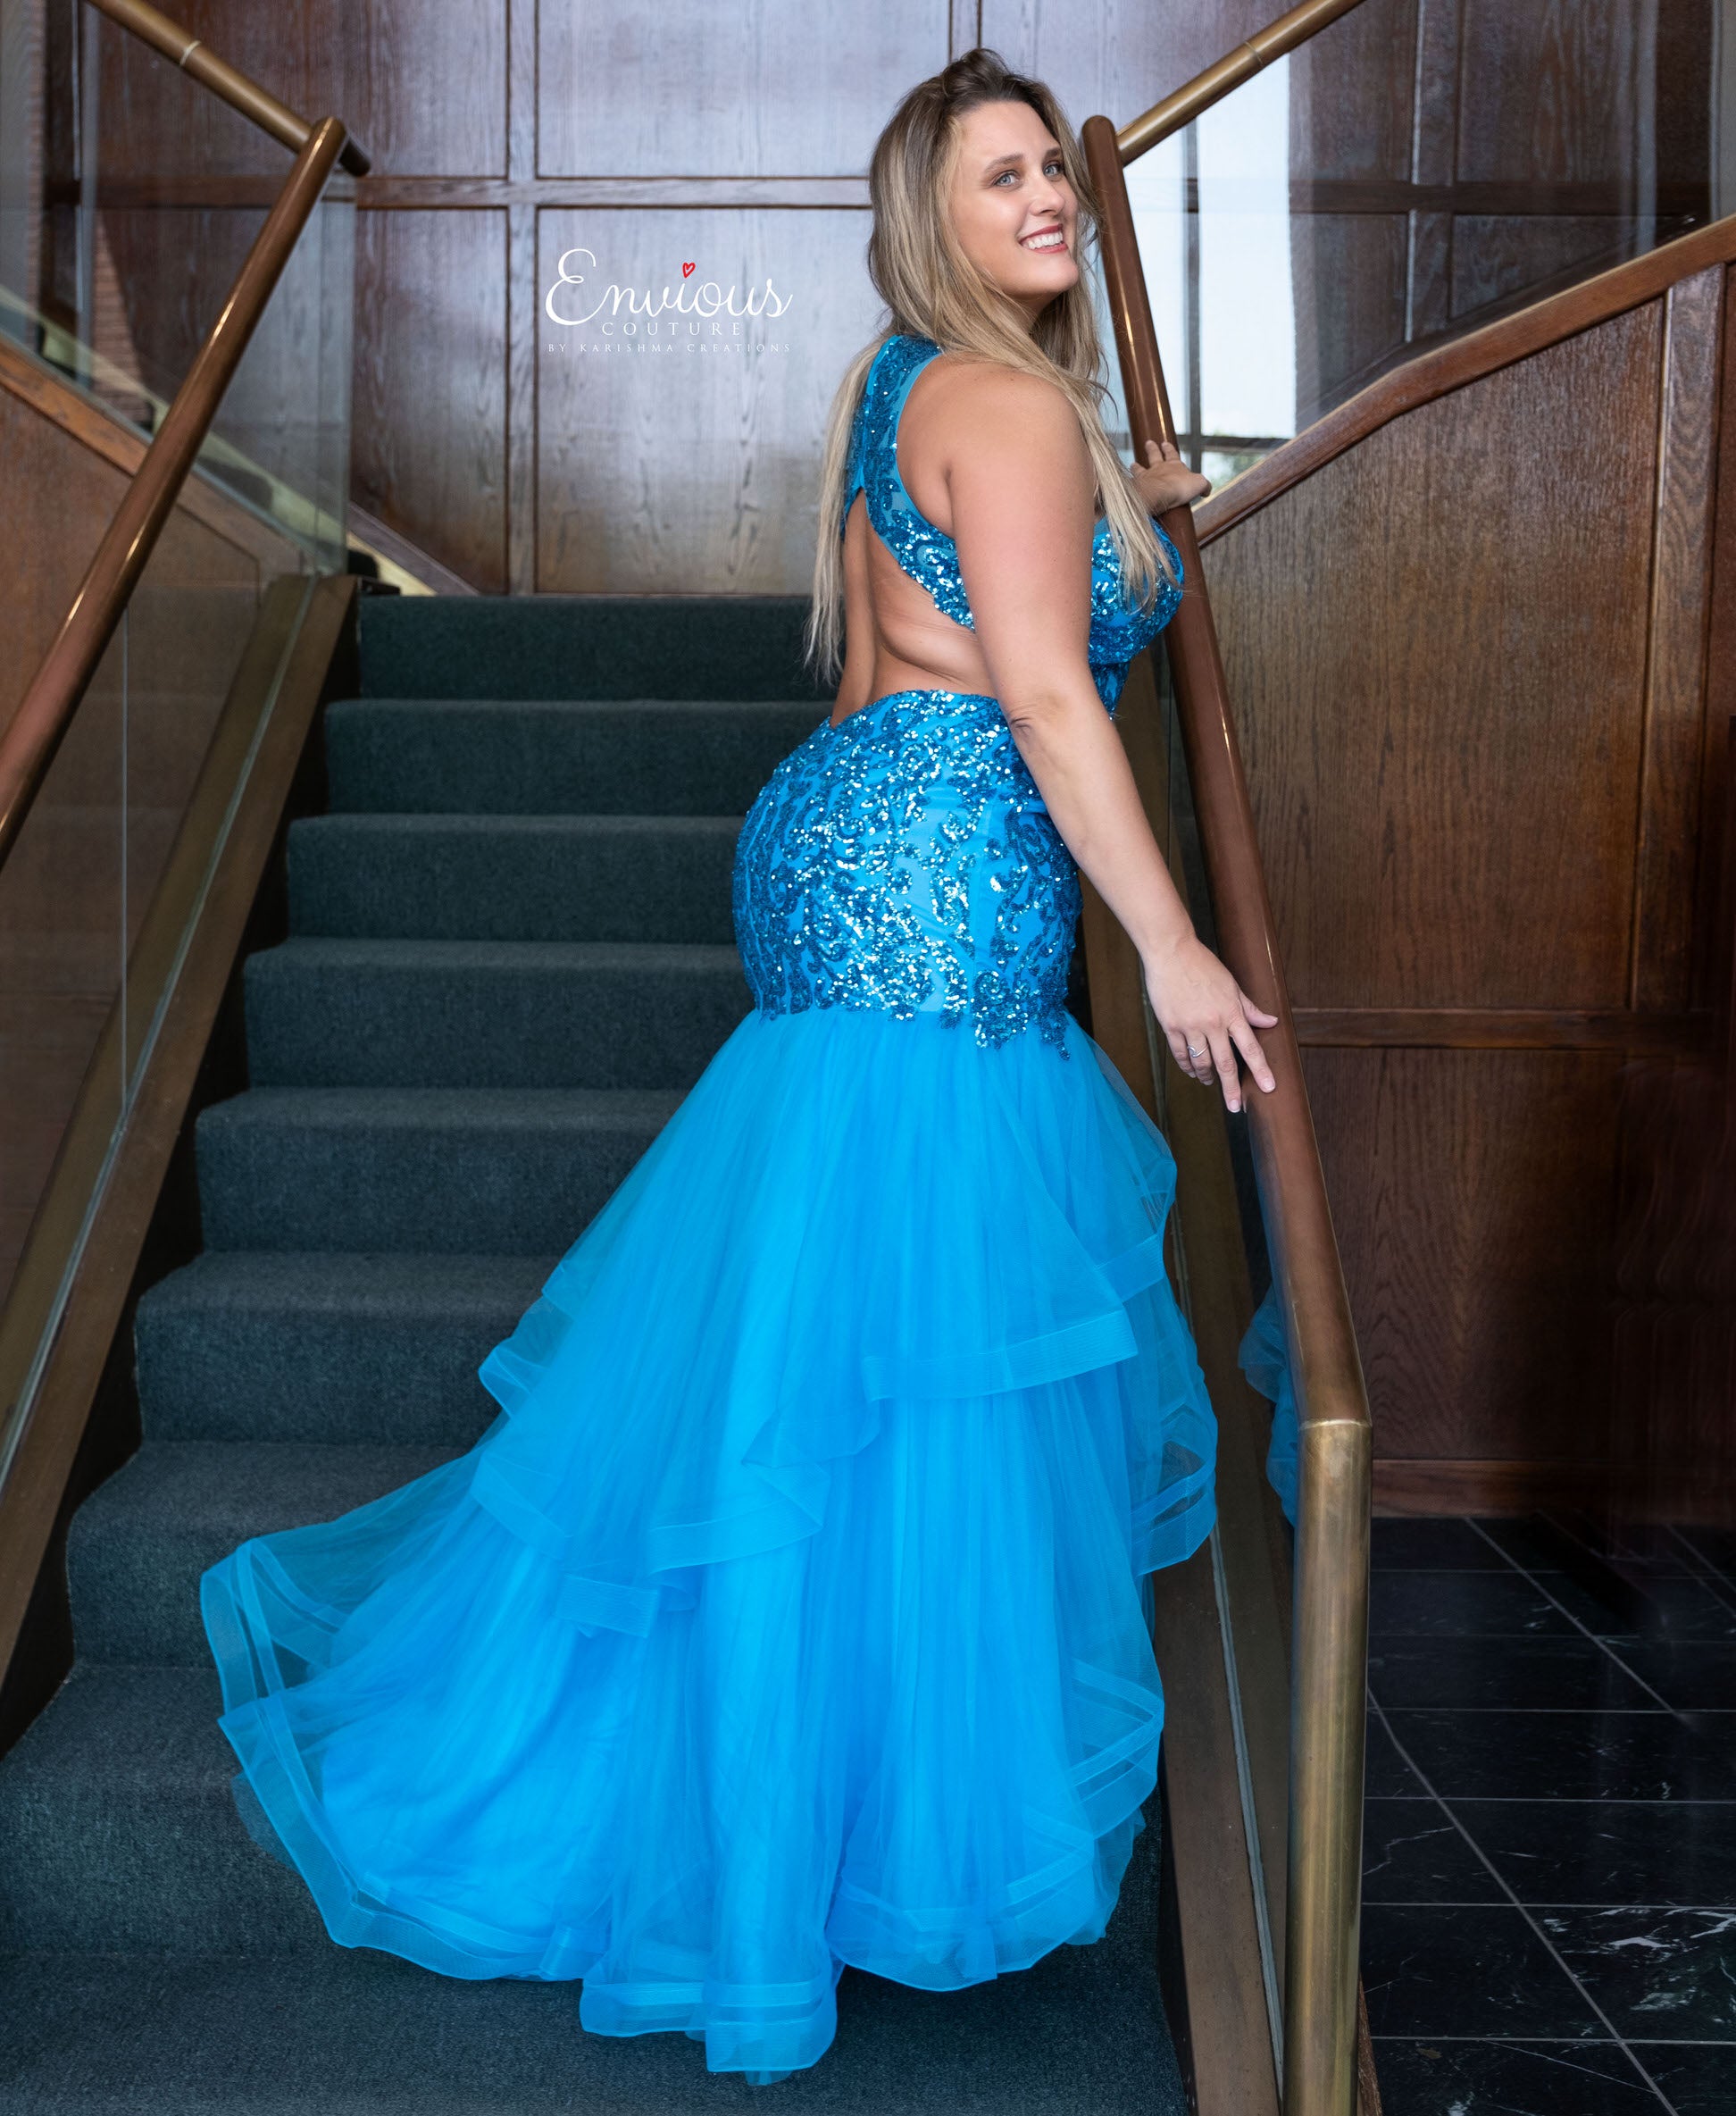 Envious-Couture-E1516-Turquoise-Prom-Dress-Back-Emebllished-V-Neckline-Sequin-Fit-and-Flare-Layered-Mermaid-Skirt